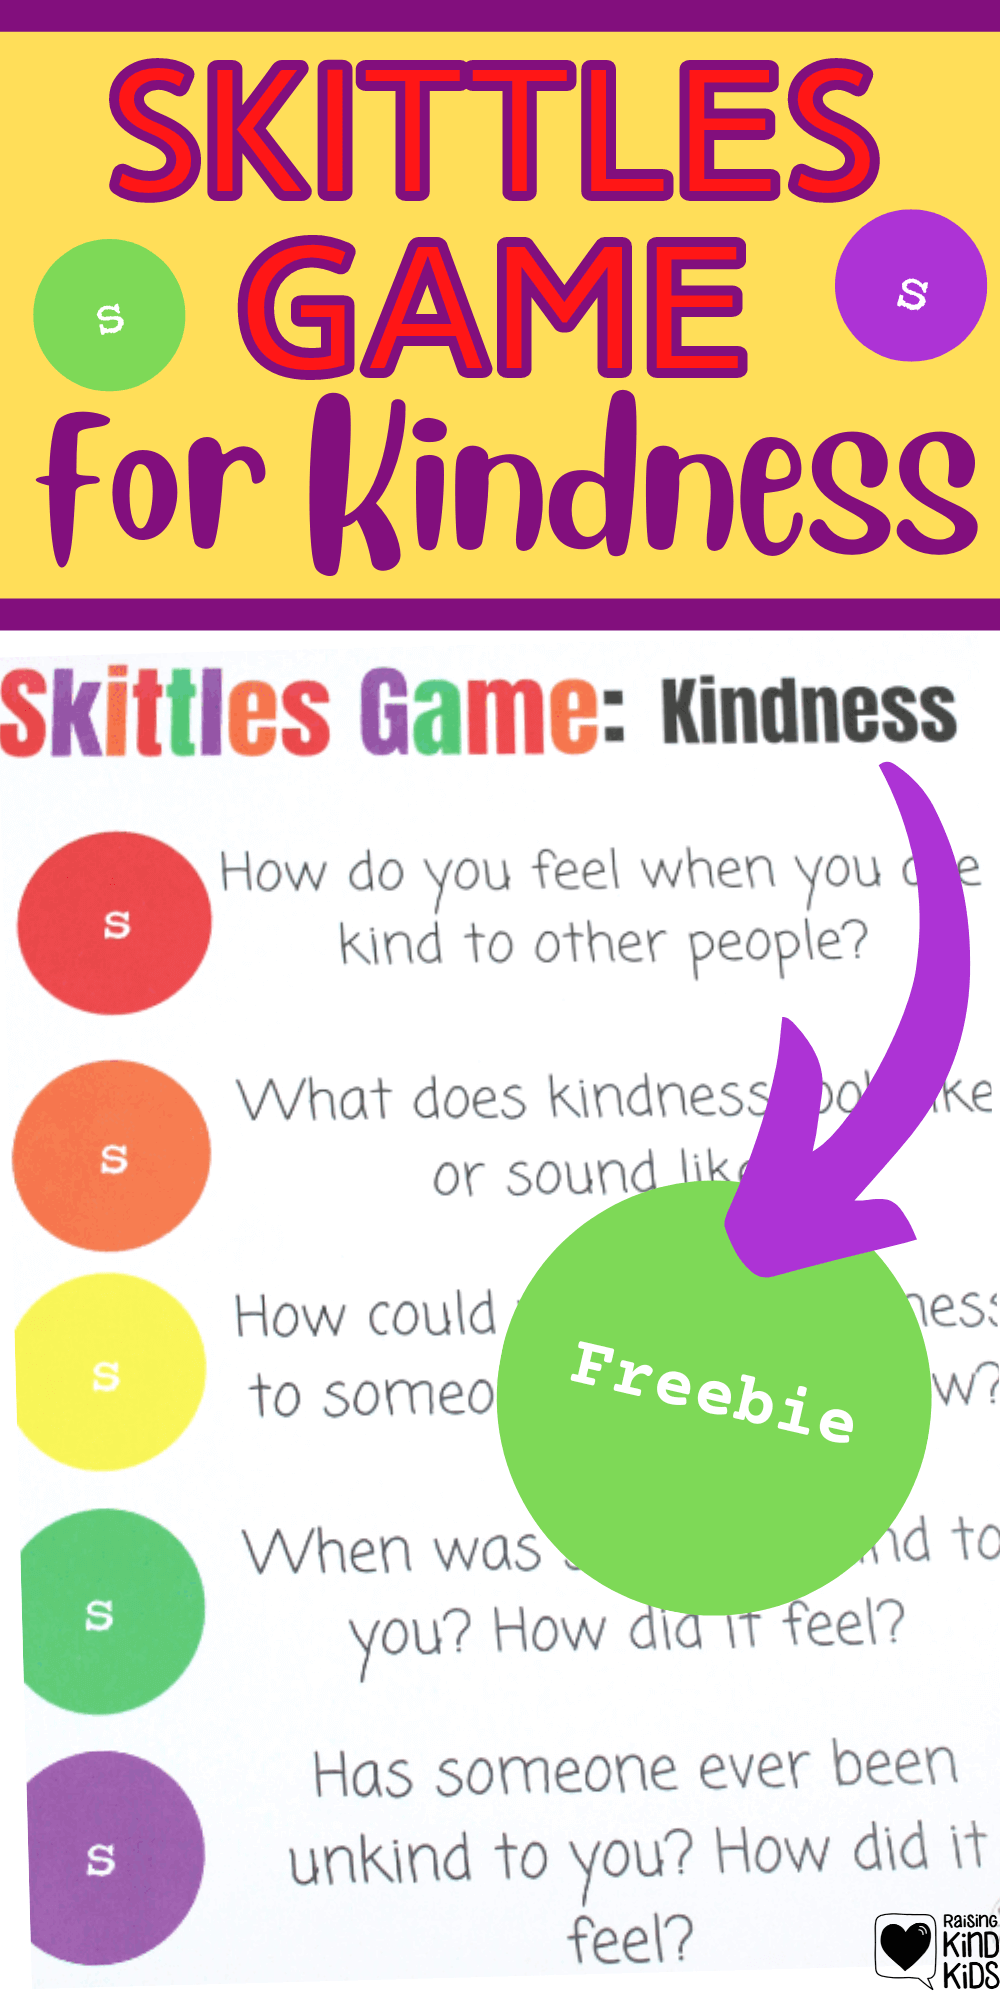 Skittles Activity for Kids to Encourage Kindness and Friendship by having meaningful discussions and conversations about hard topics. This is perfect for youth groups, Scouts, classrooms and family dinners. #skittlesgames #skittles #kindness #discussion #familydinner #scouts #coffeeandcarpool #kindness